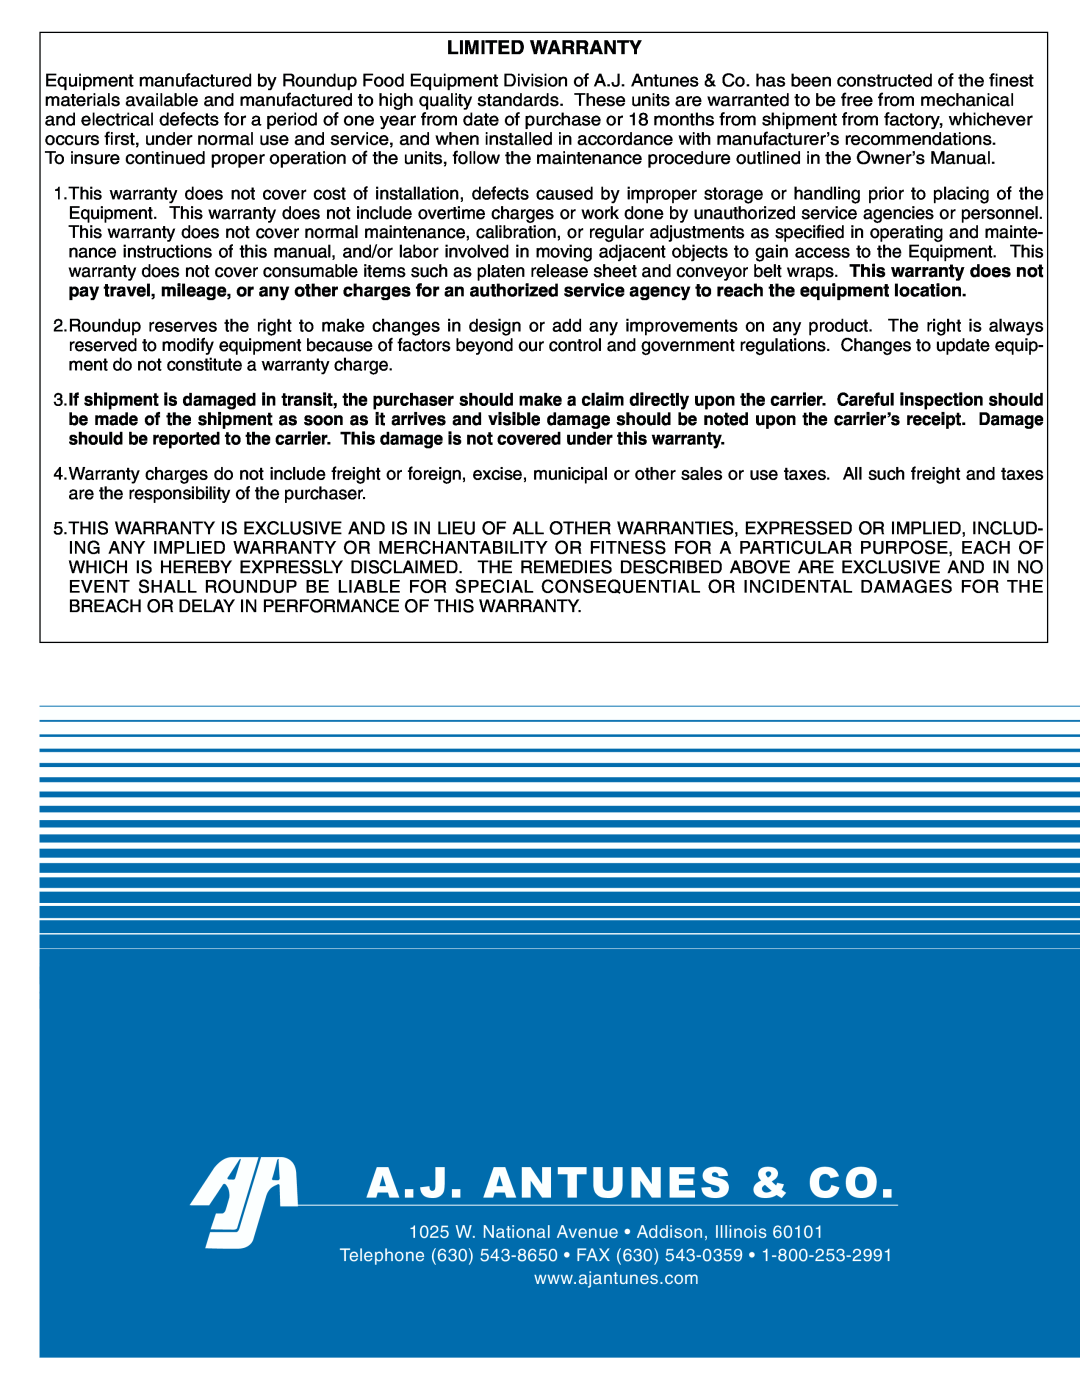 Antunes, AJ MS-355, MS-250/255 owner manual A.J. Antunes & Co, Limited Warranty, 1025 W. National Avenue Addison, Illinois 